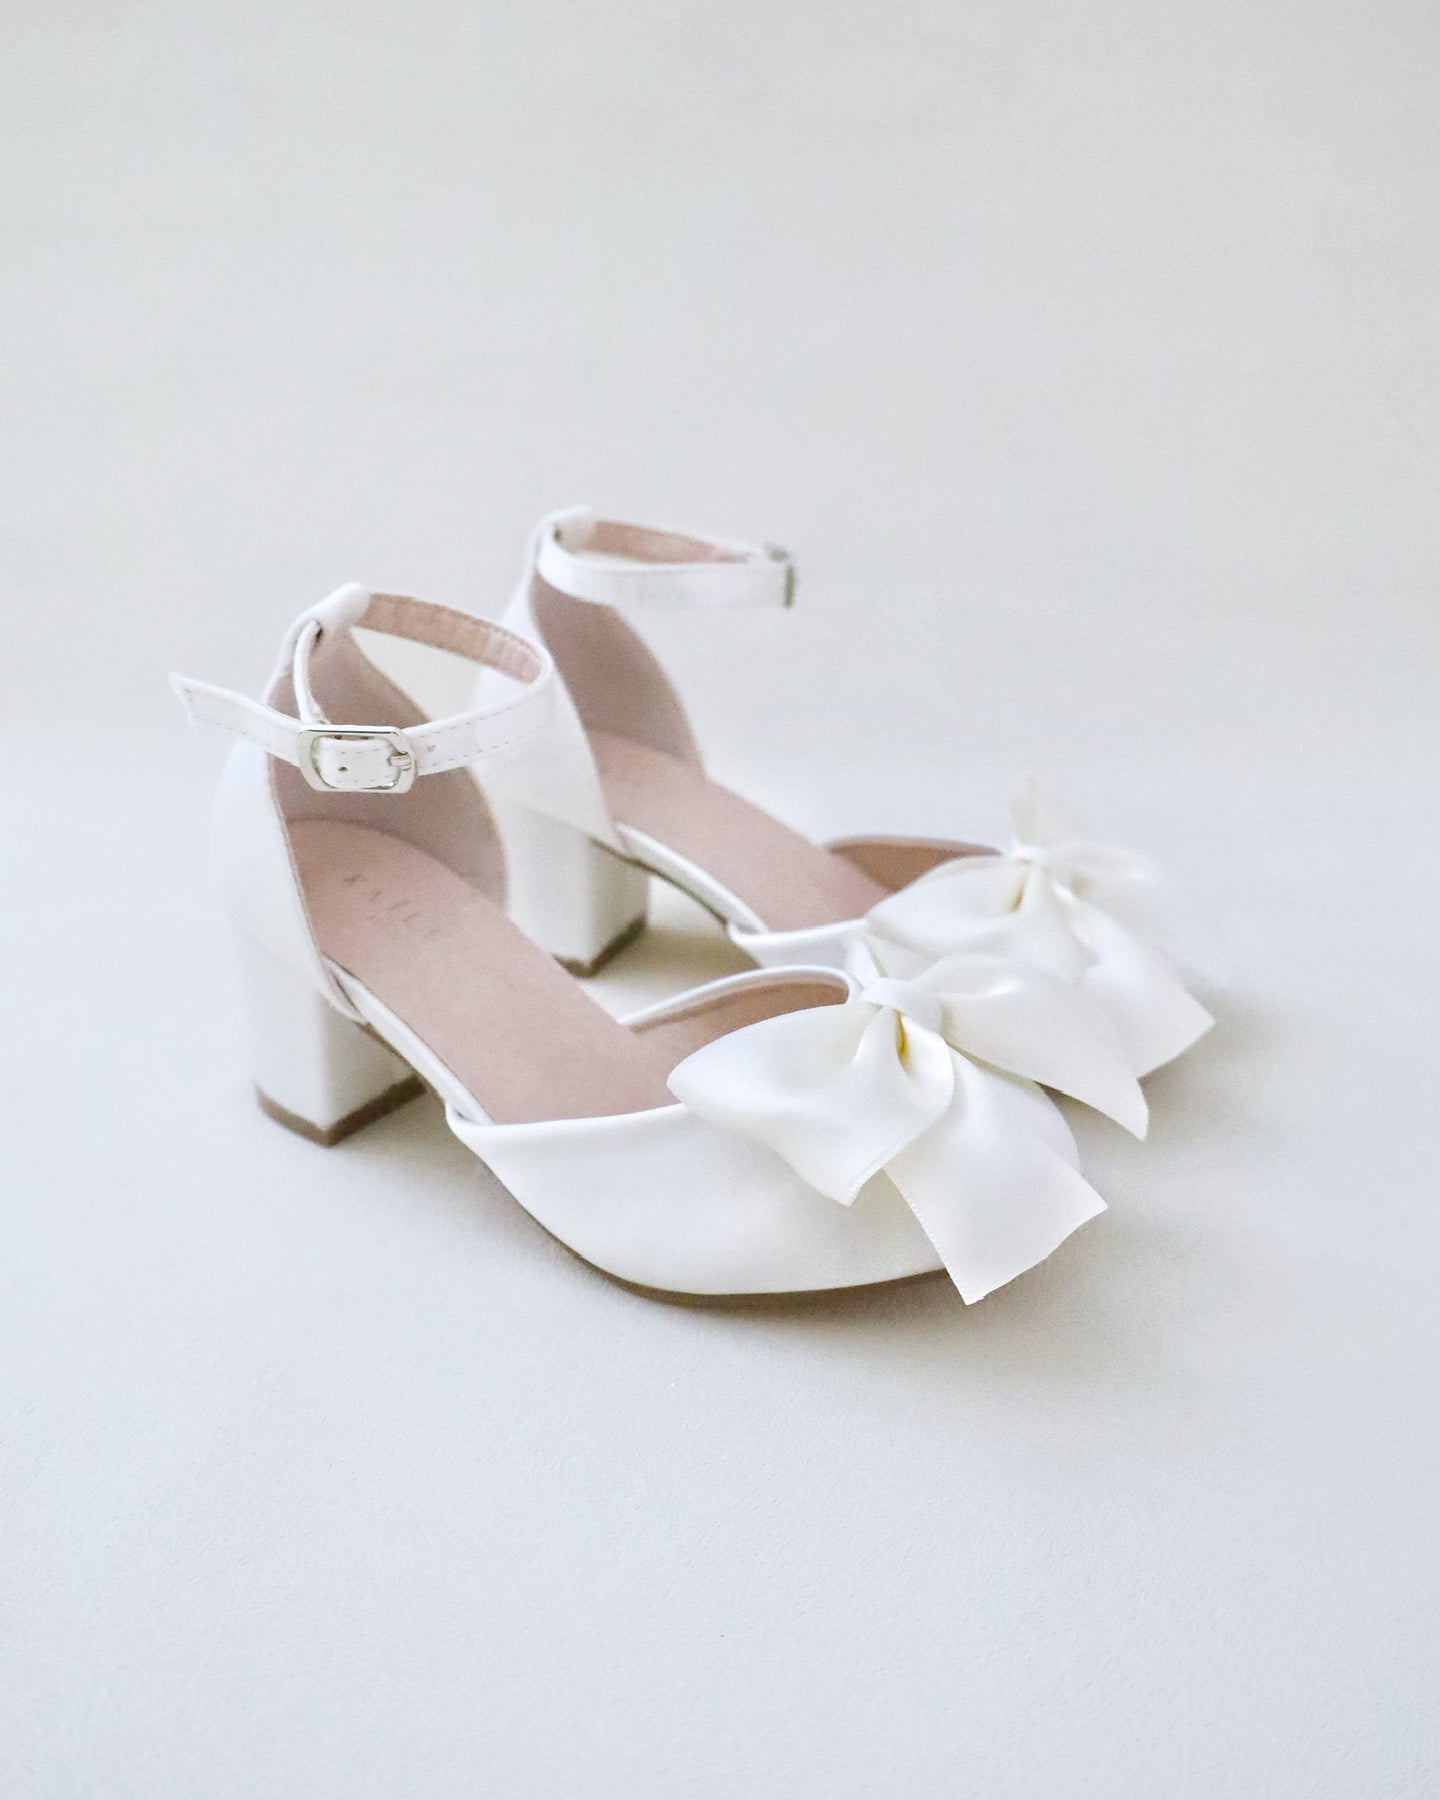 Girls Satin Block Heel with Front Satin Bow, Flower Girls Shoes